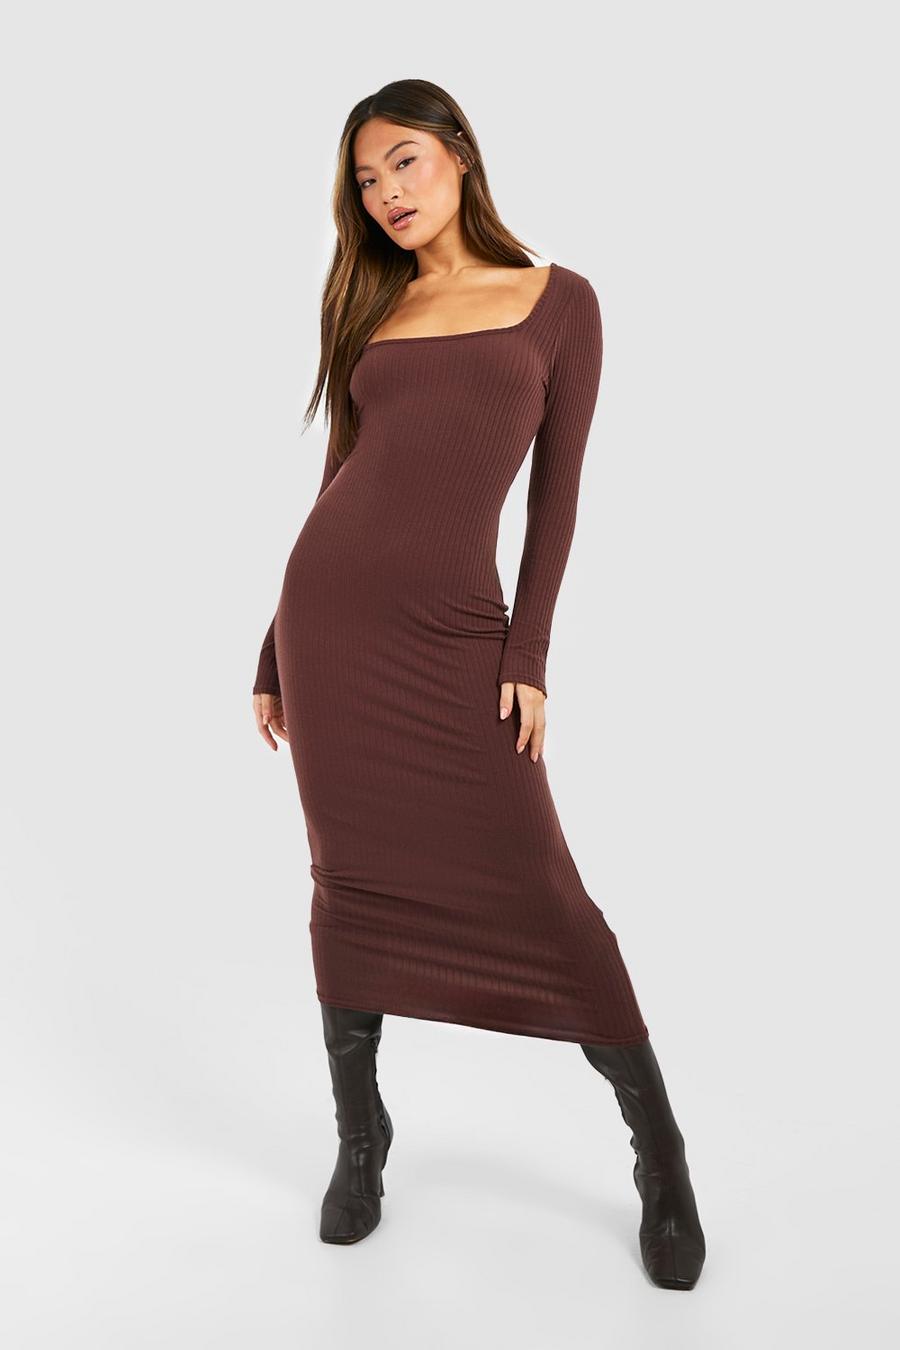 Chocolate Soft Rib Square Neck Midaxi Dress these image number 1